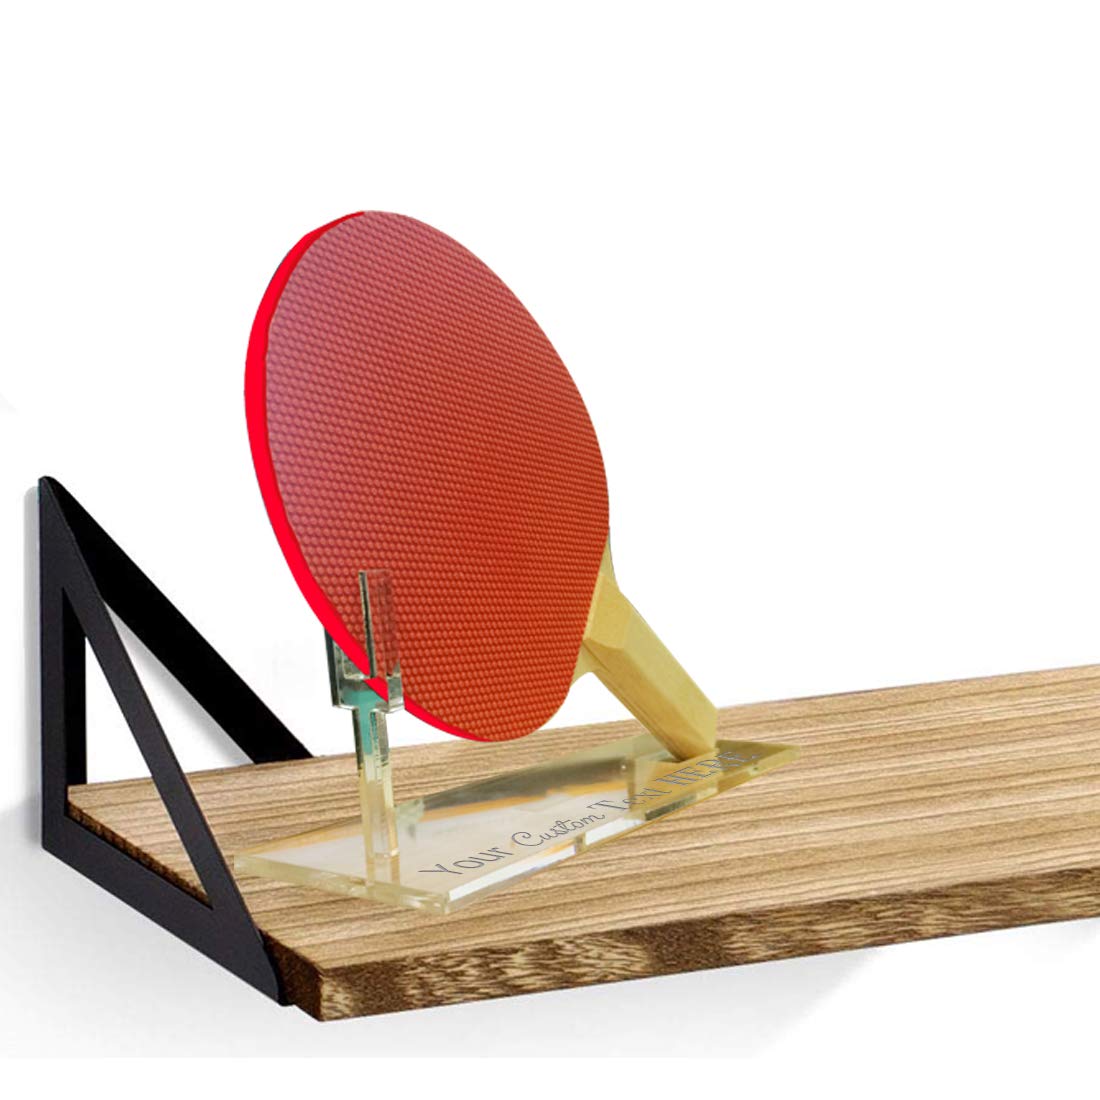 Hat Shark Acrylic Custom Engraved Ping Pong Paddle Standard Size Stand Athletic Table Tennis Sport Unique Trophy Display Stand (Ping Pong Paddle Not Included) (Custom)